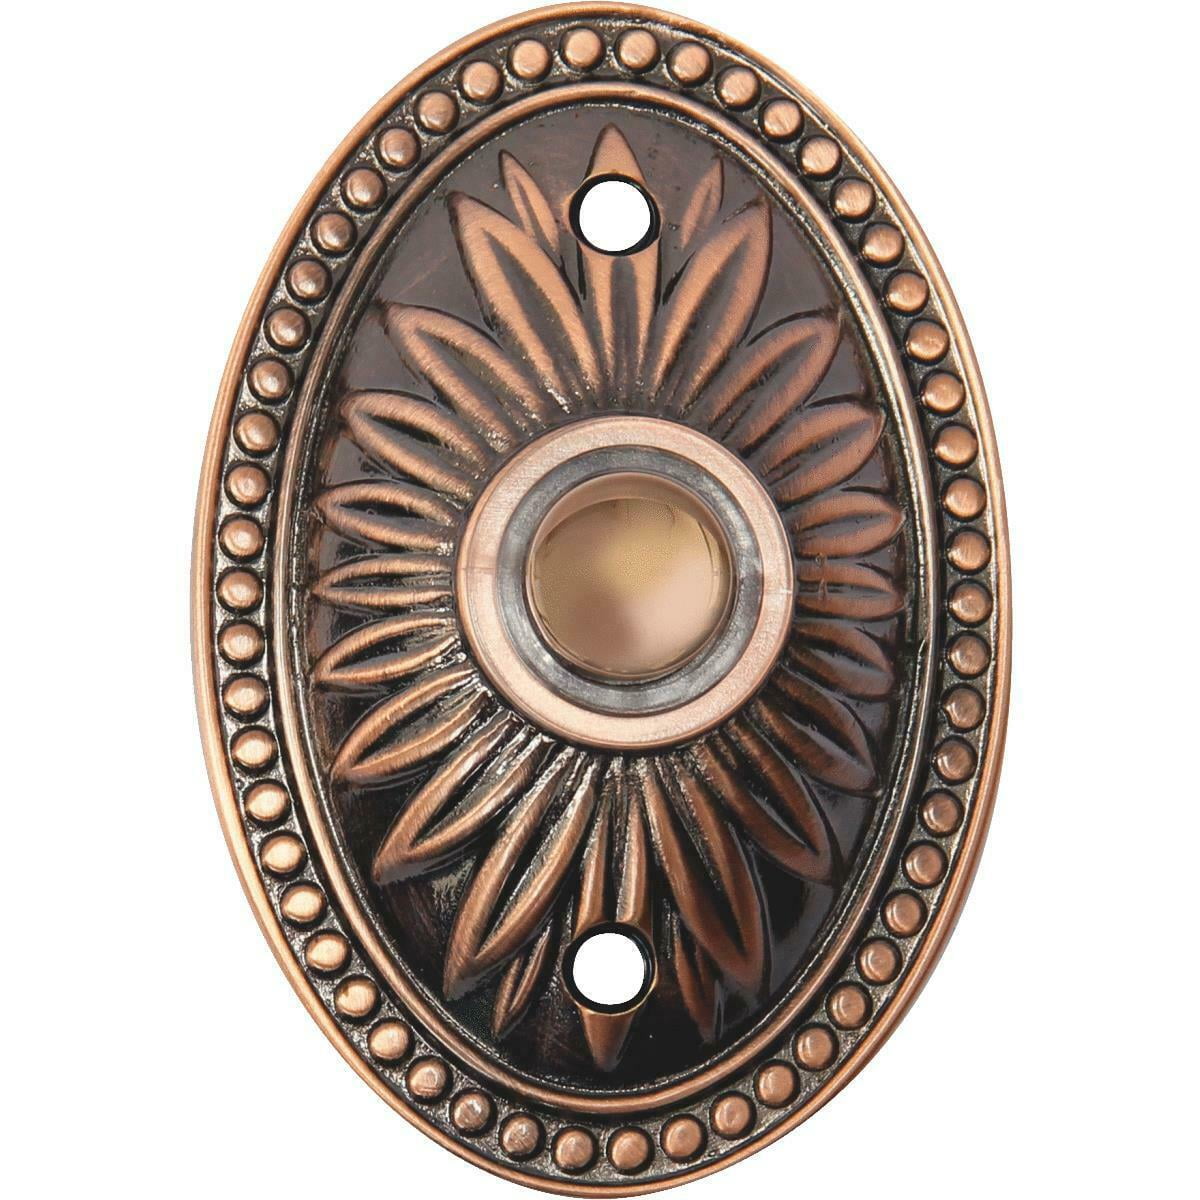 IQ America Wired Oil Rubbed Bronze Medallion Design Lighted Doorbell Push-Button